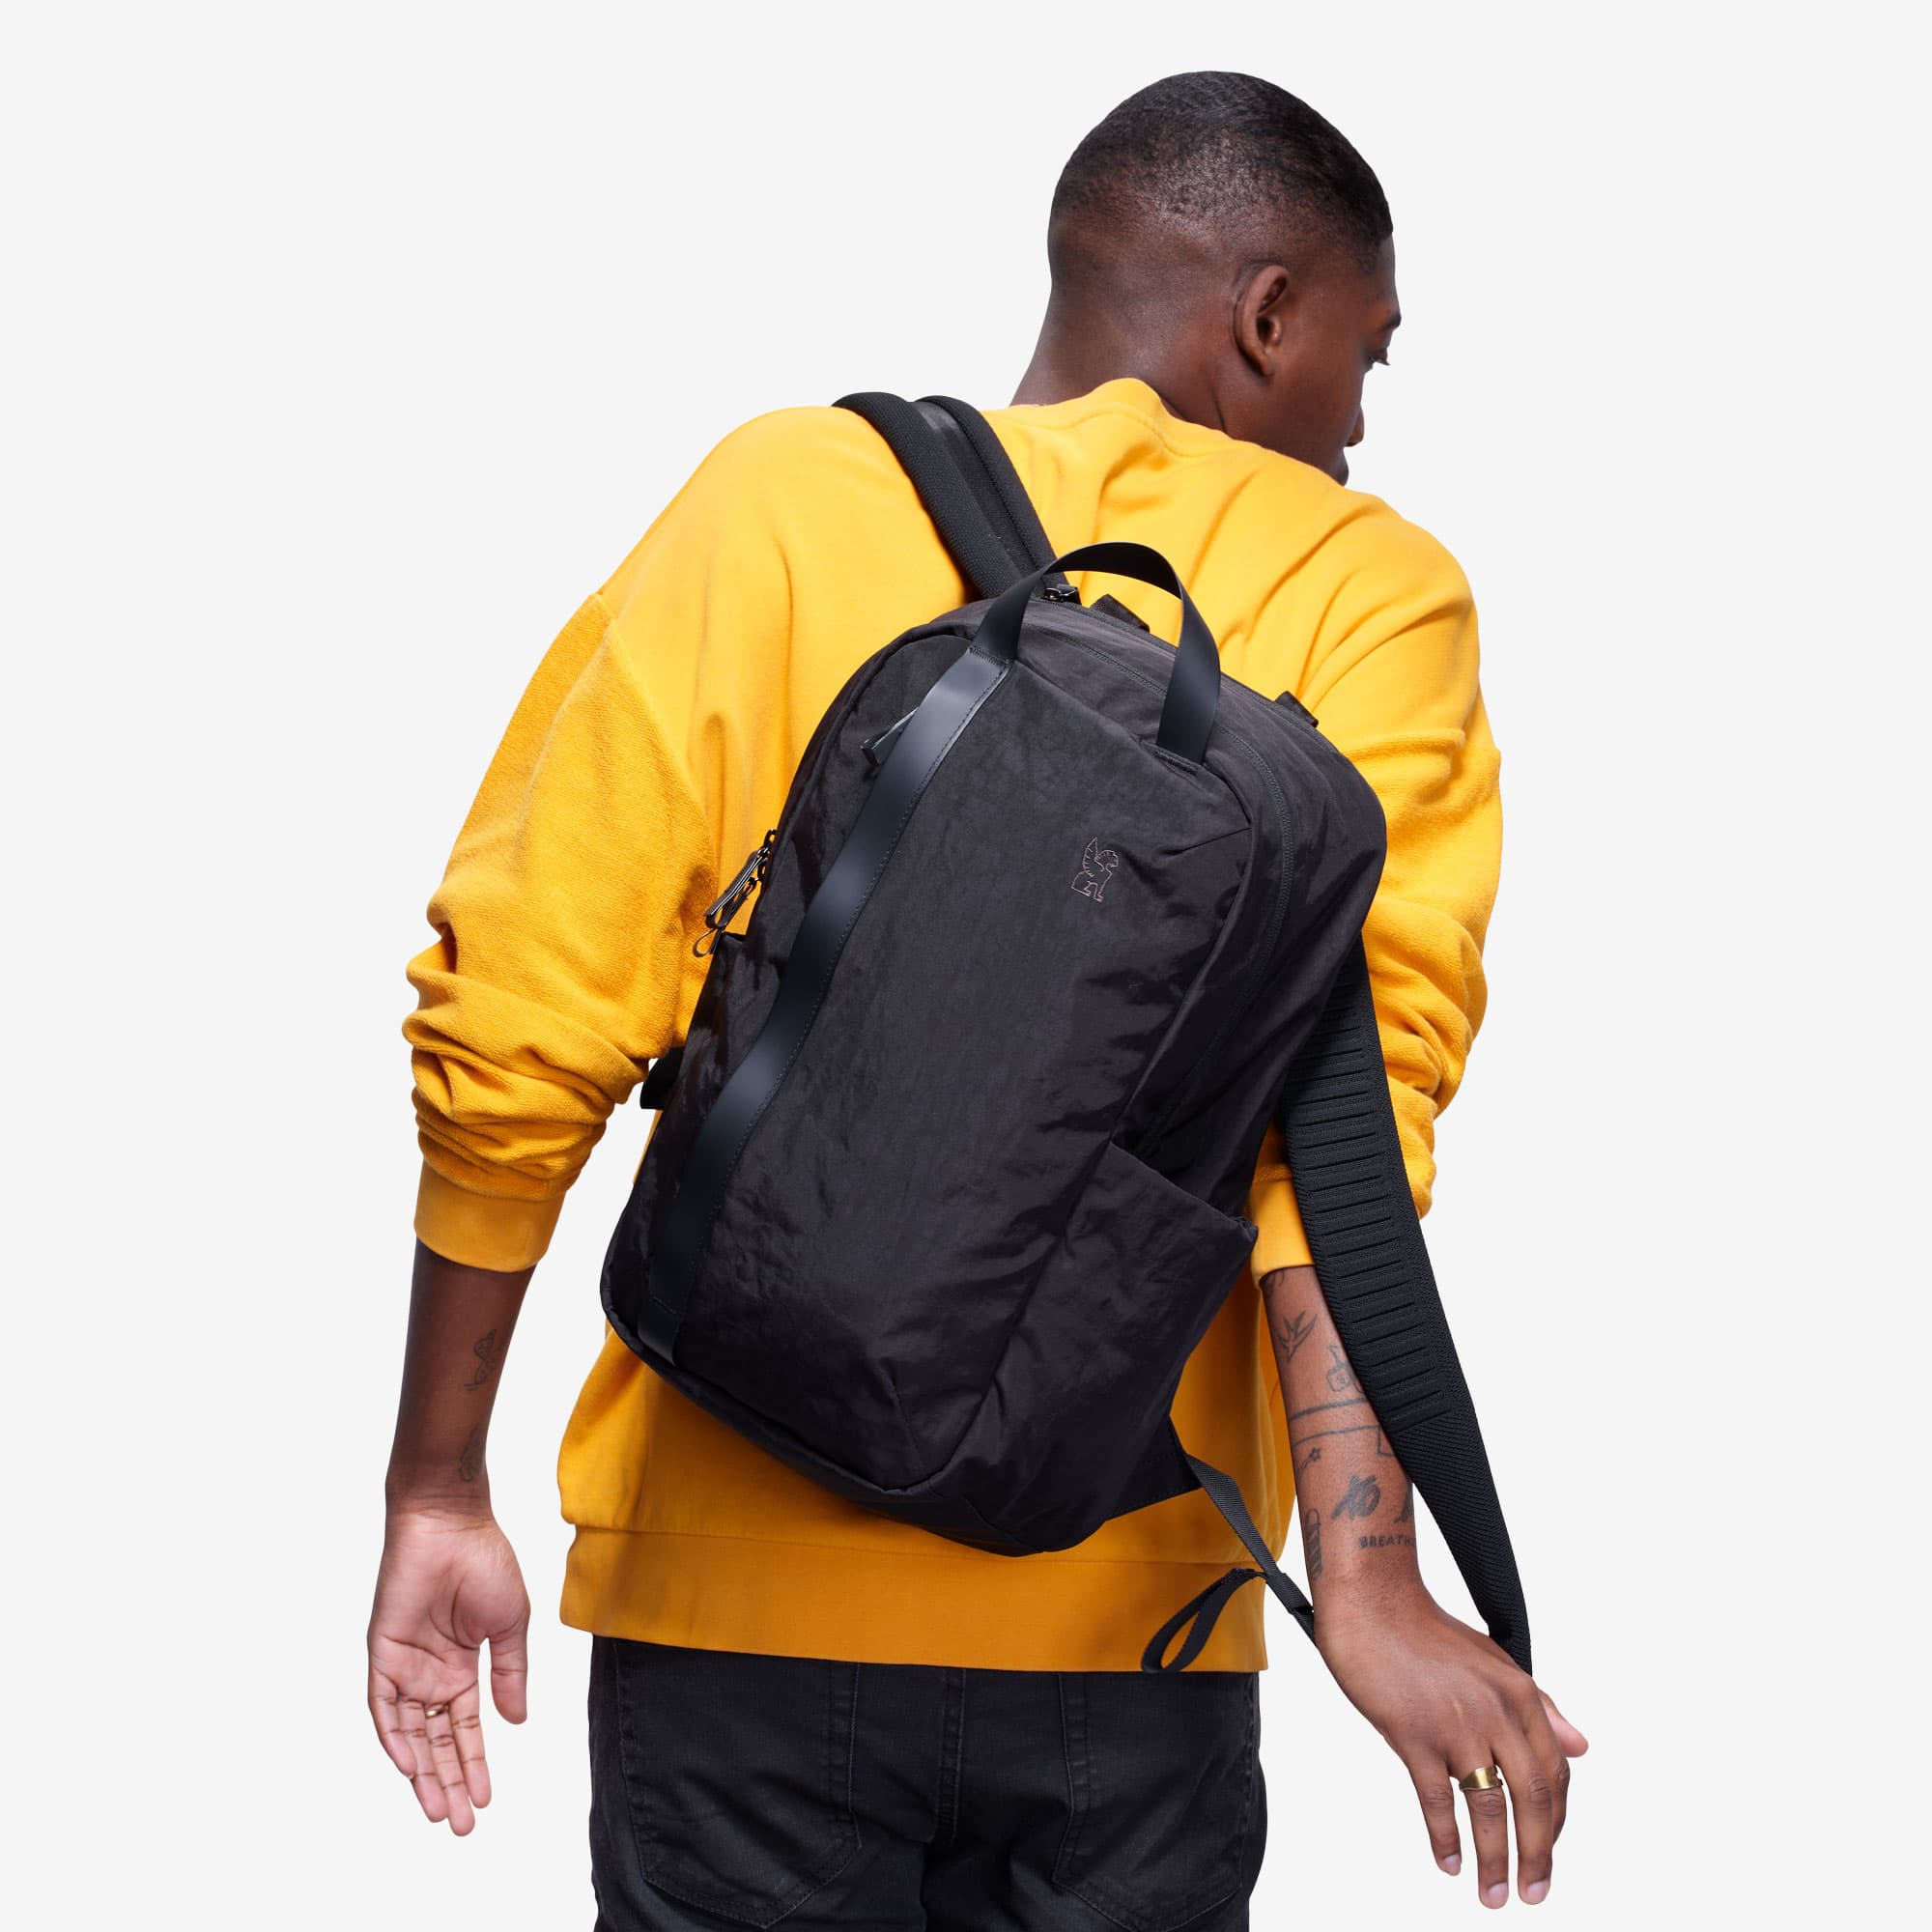 Man putting on the Highline backpack